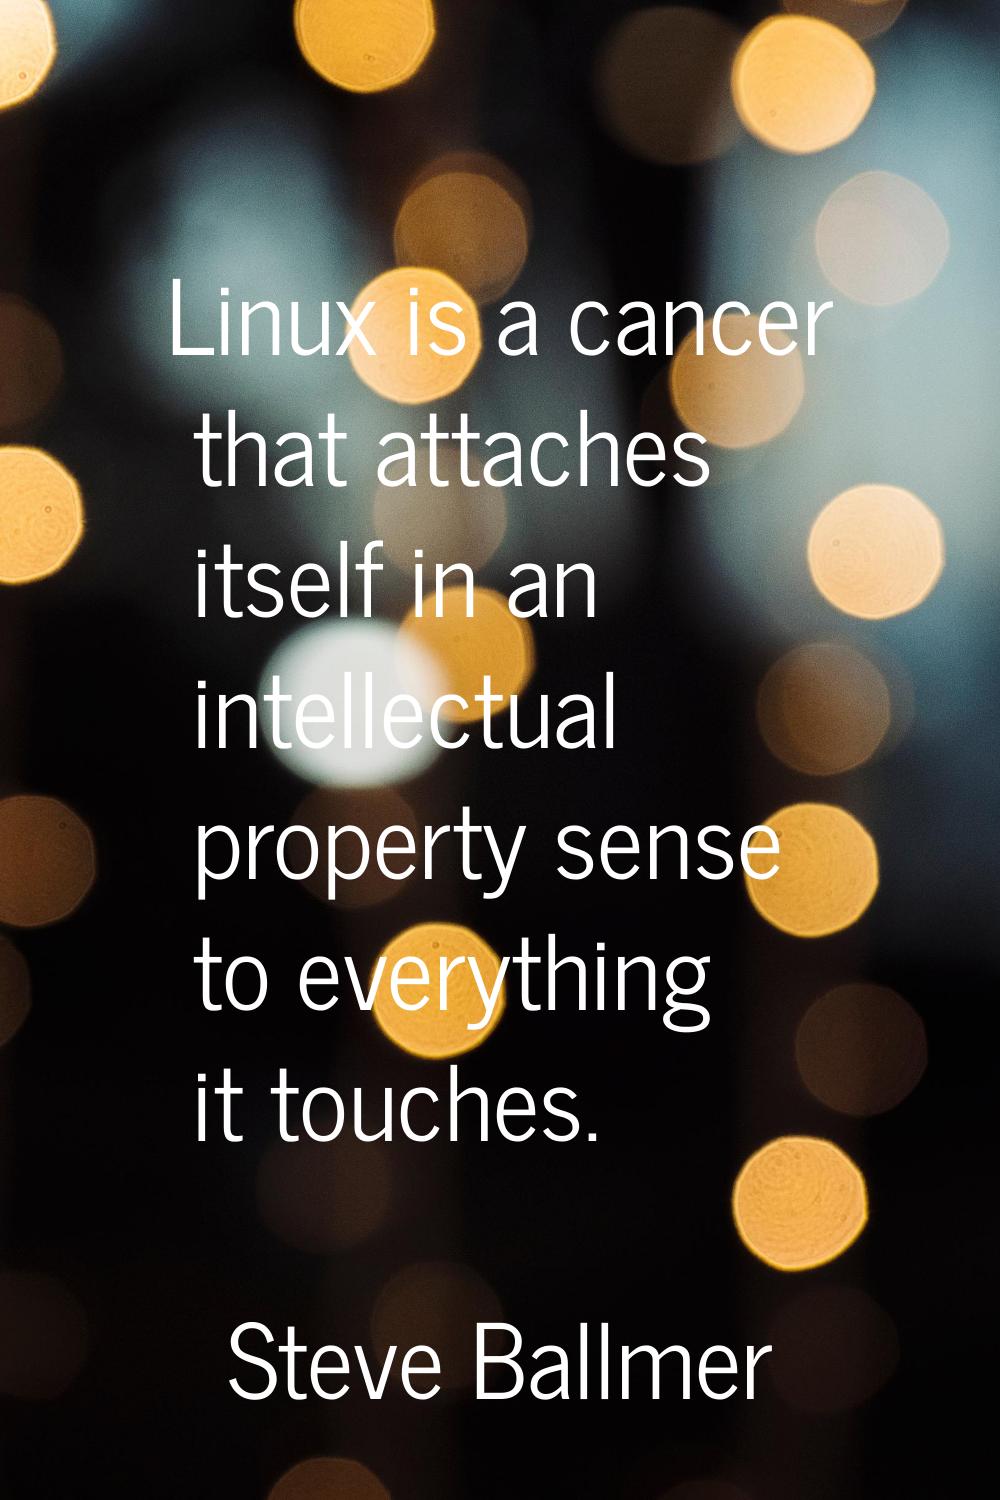 Linux is a cancer that attaches itself in an intellectual property sense to everything it touches.